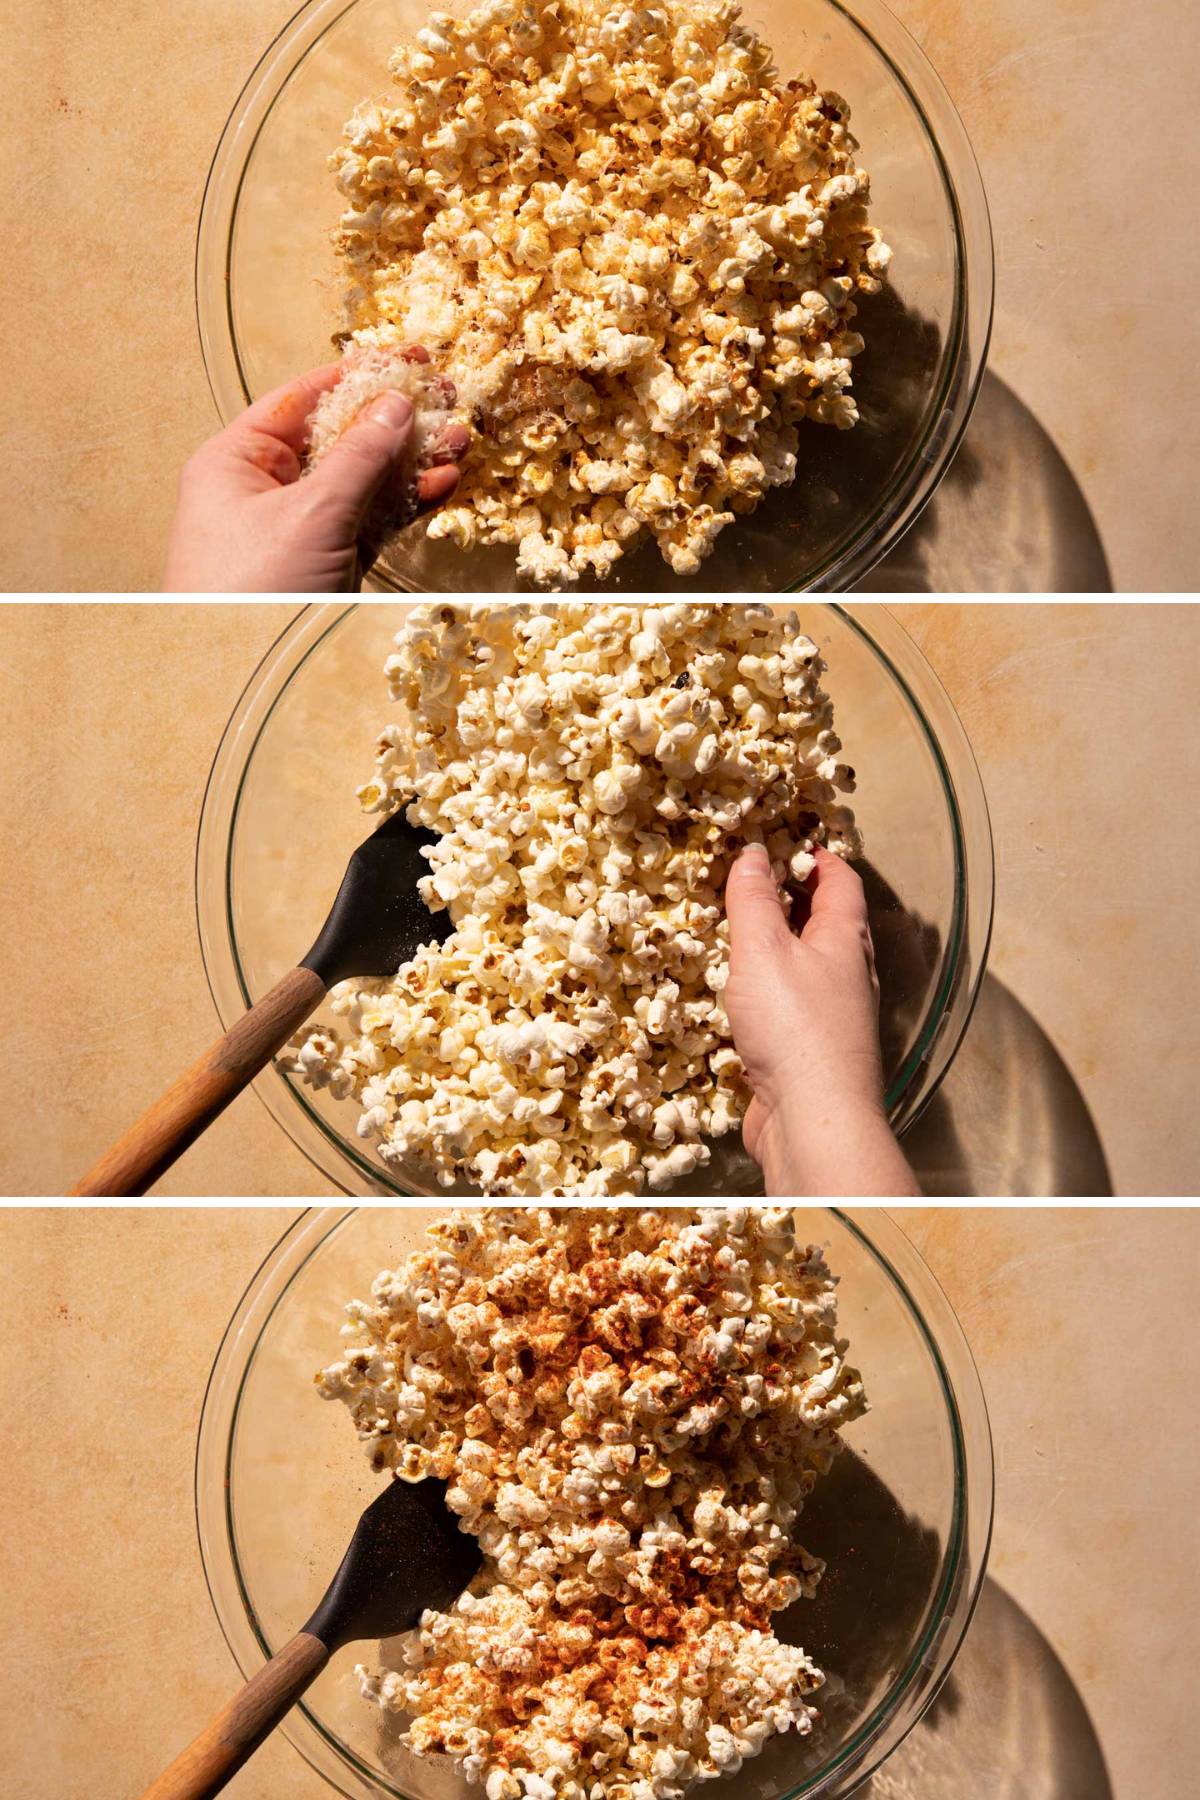 A grid of mixing parmesan and smoked paprika over popcorn in a bowl